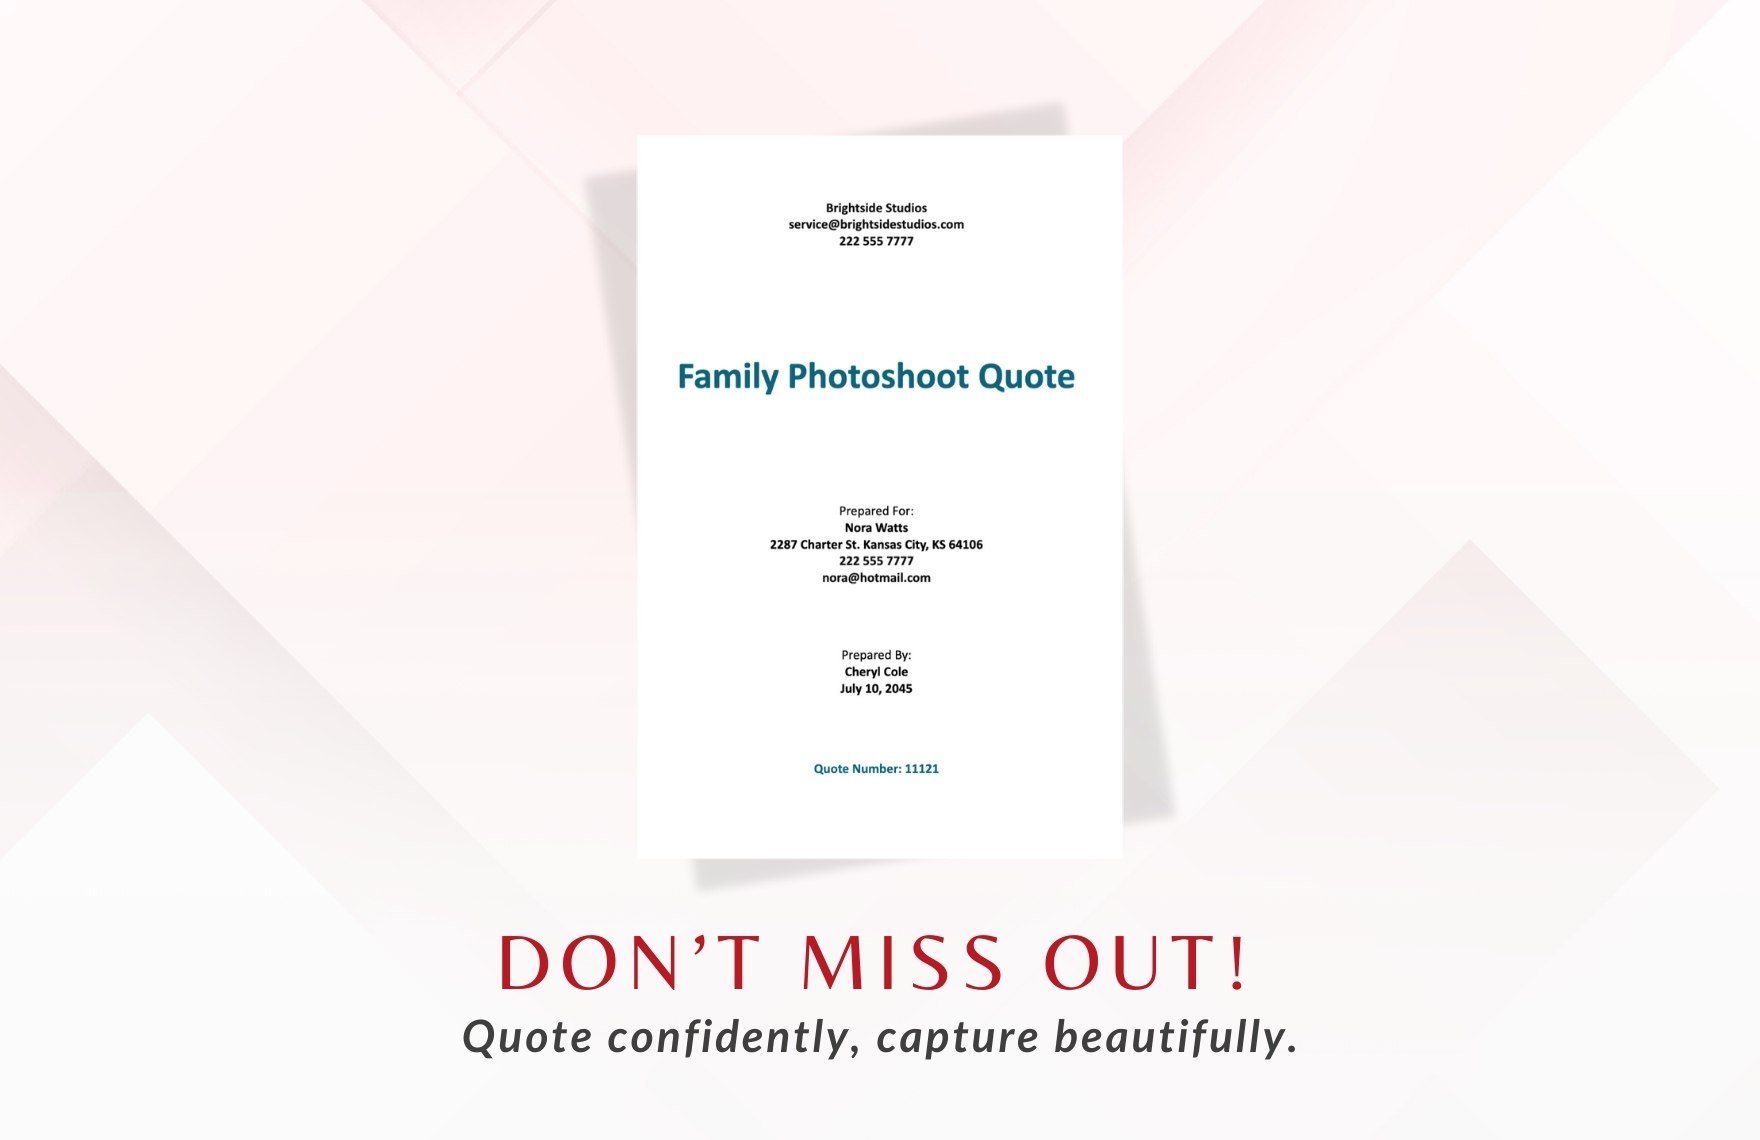 Professional Photography Quotation Template